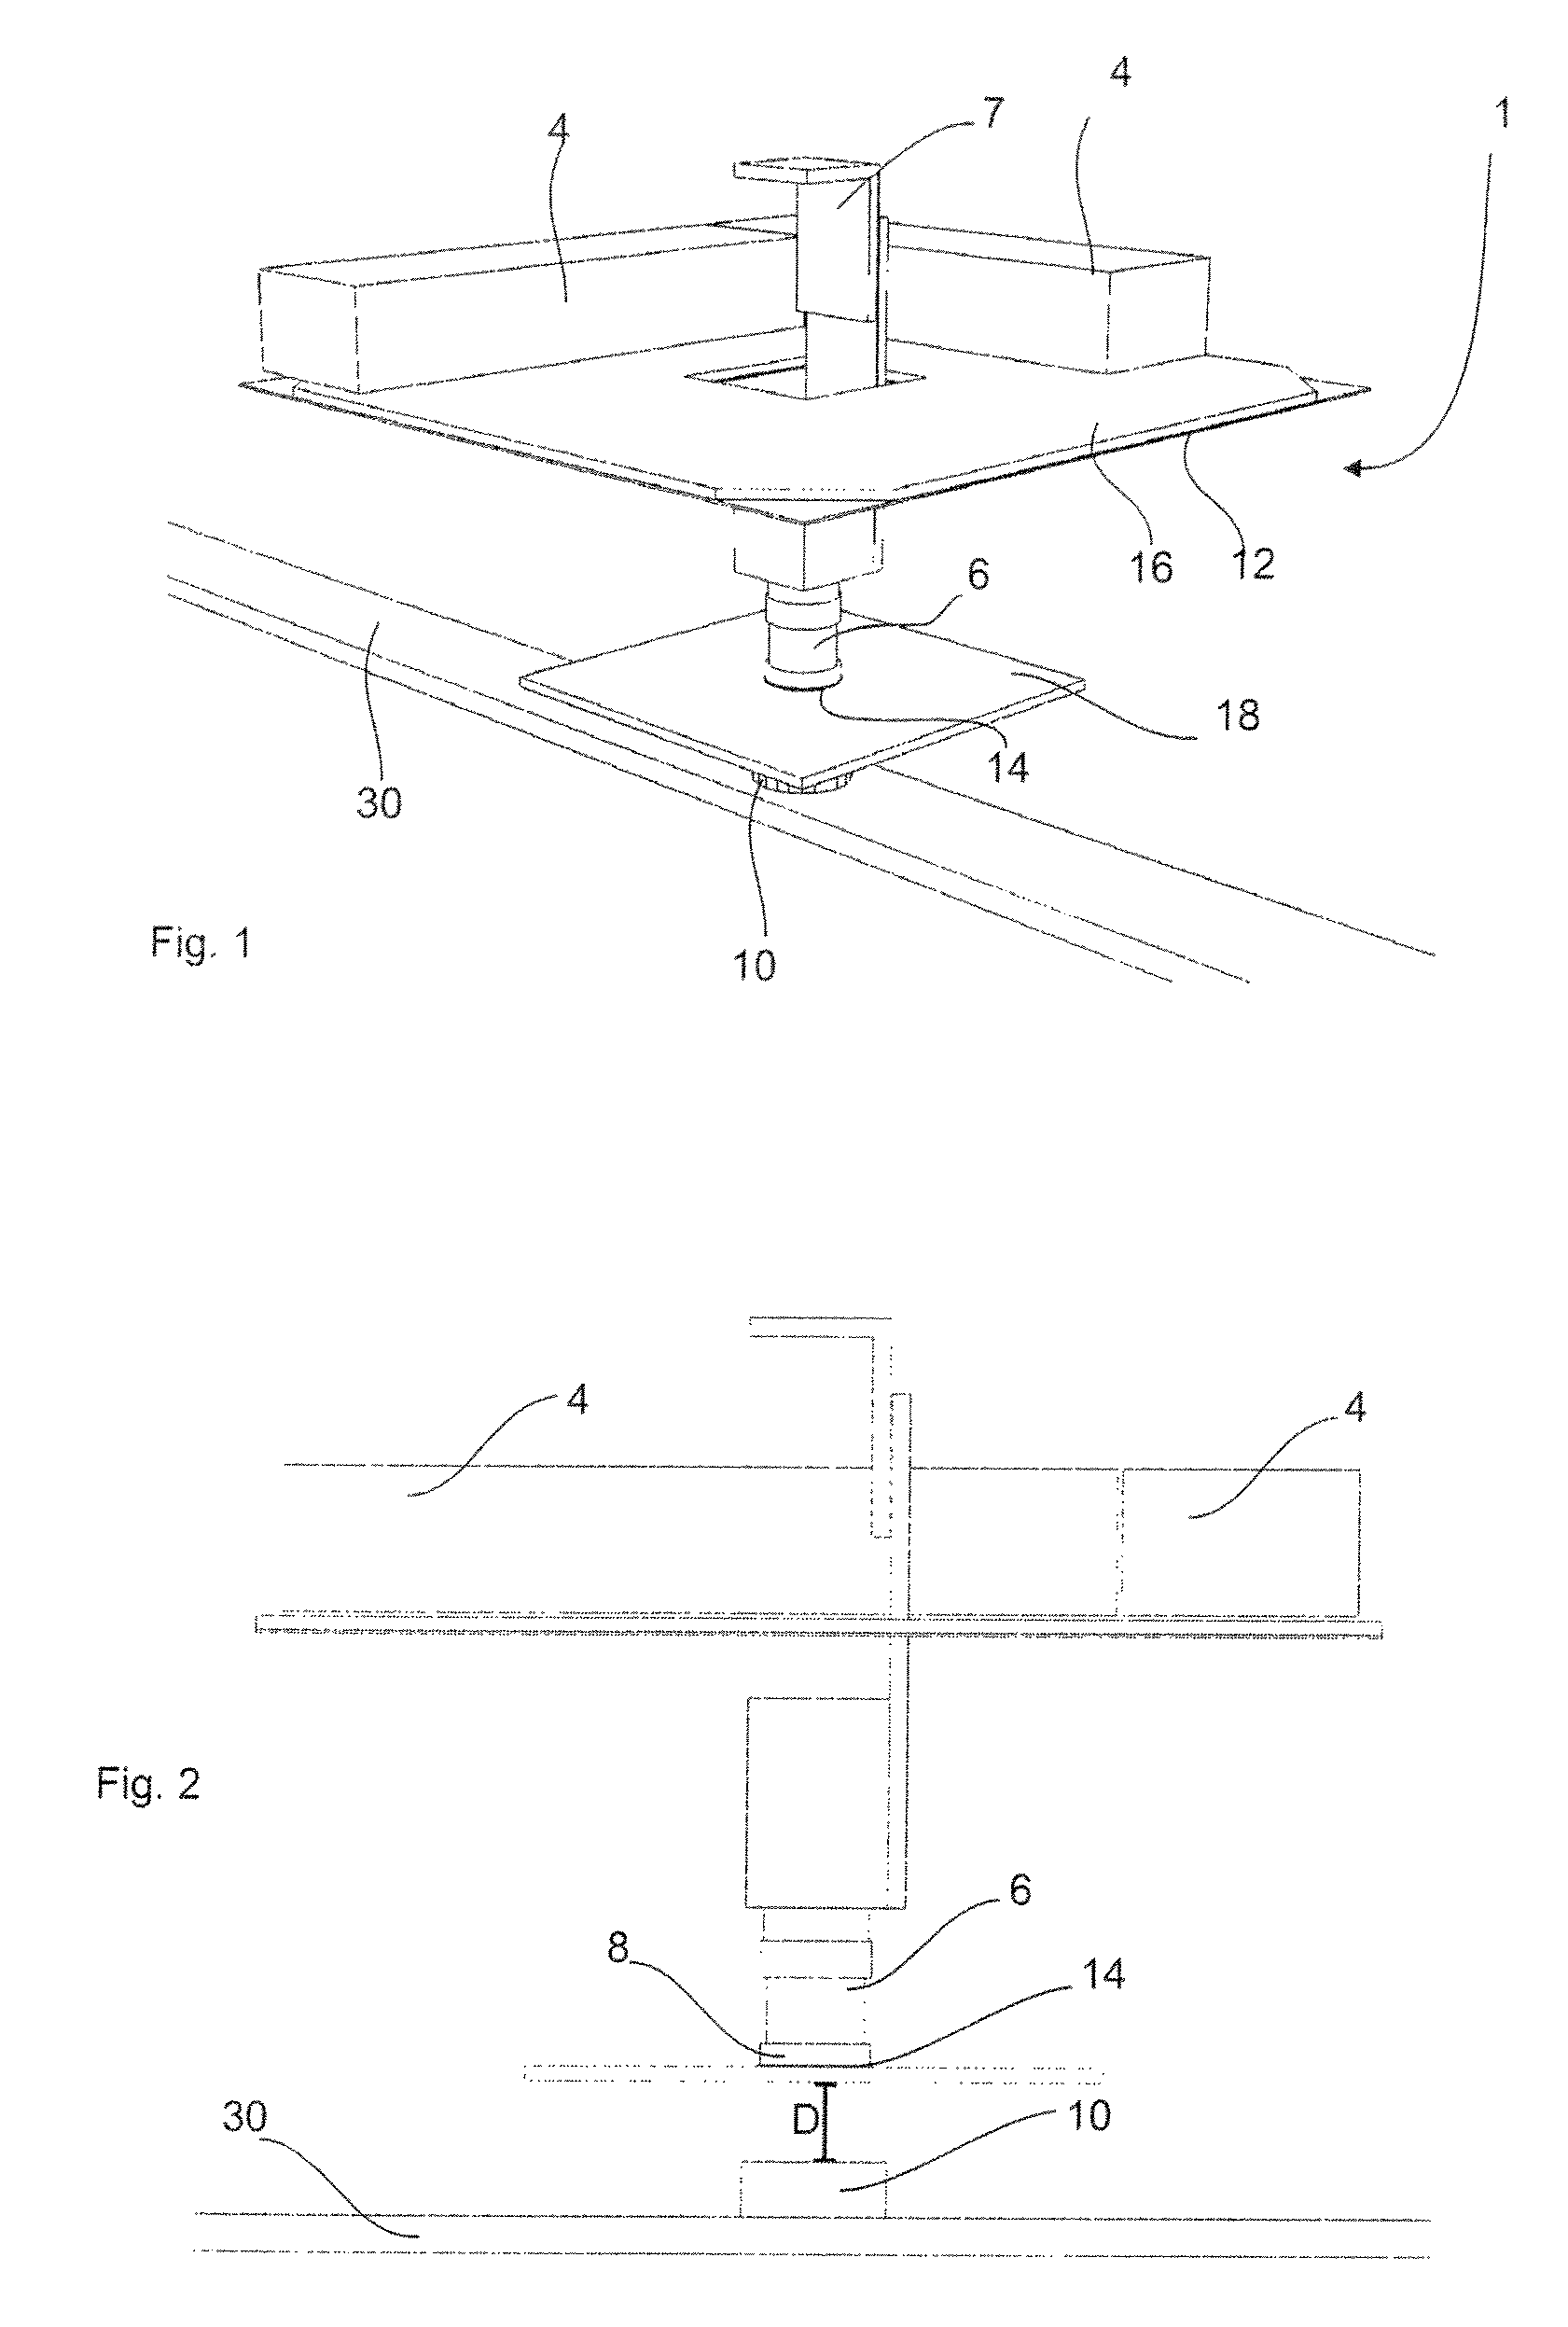 Inspection device for inspecting container closures